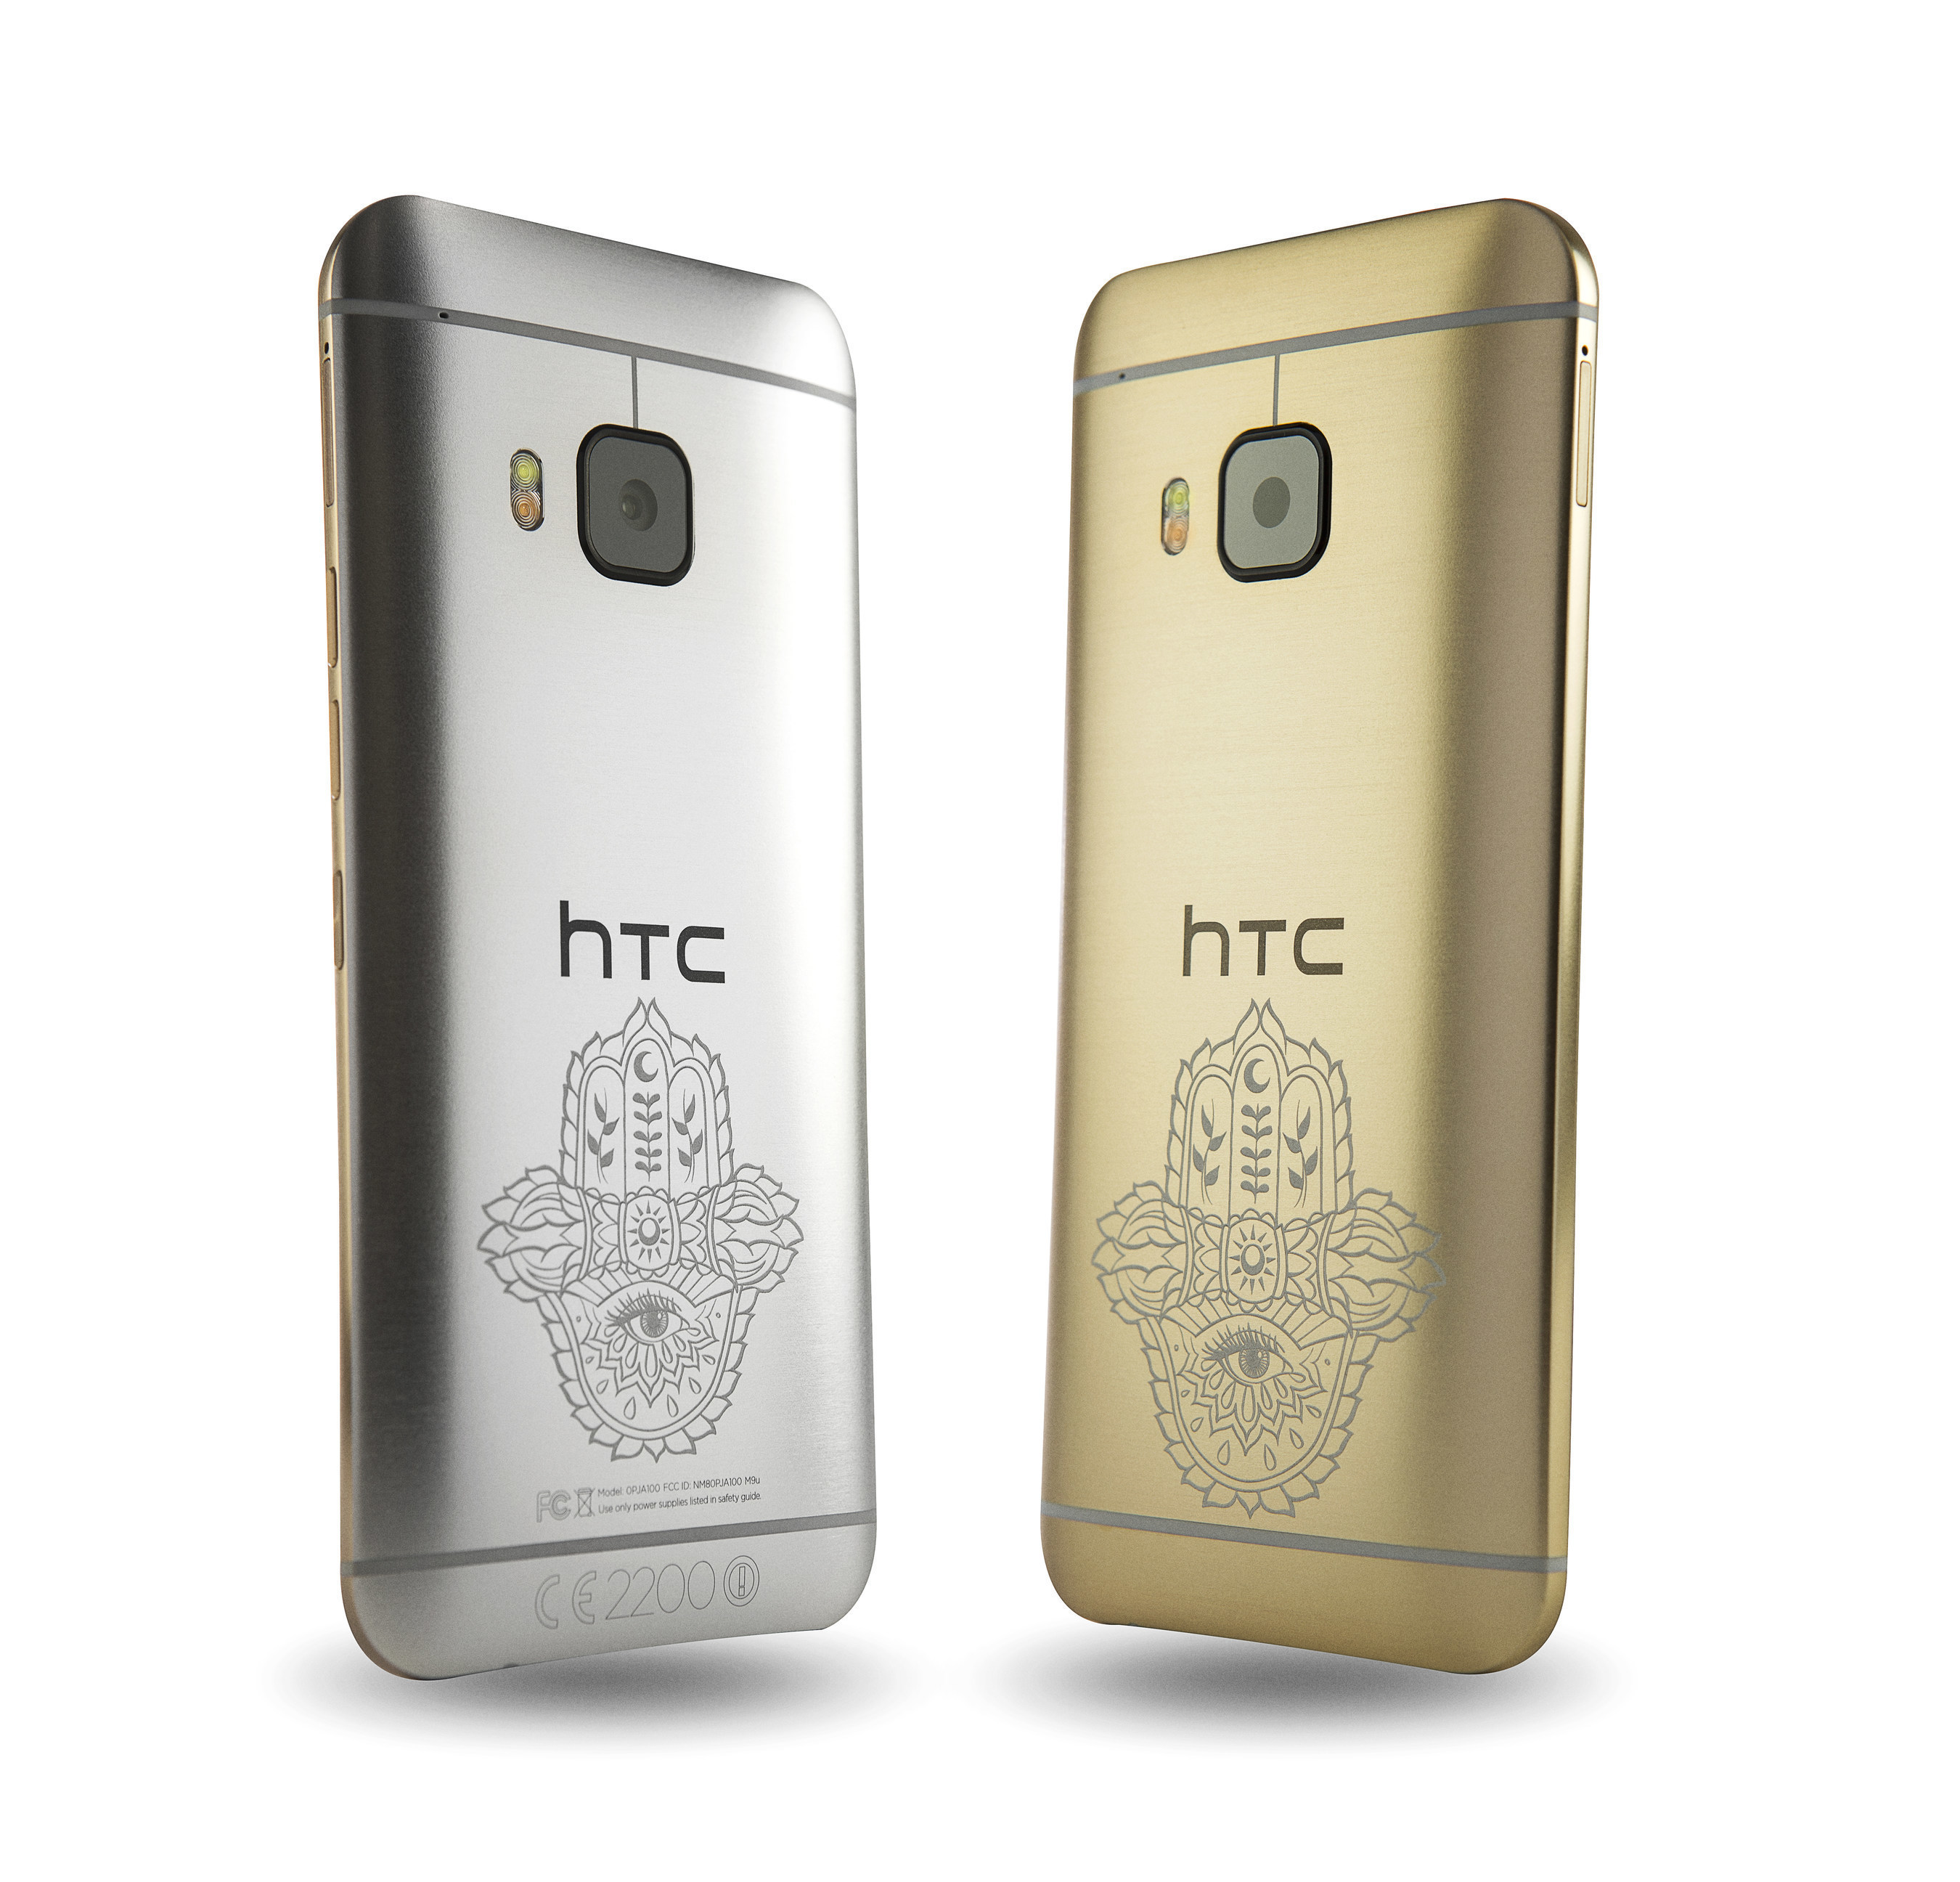 HTC, a global leader in innovation and design, today unveiled its exclusive Limited Edition HTC One M9 INK handset, created in collaboration with worldwide fashion icon and supermodel Jourdan Dunn.